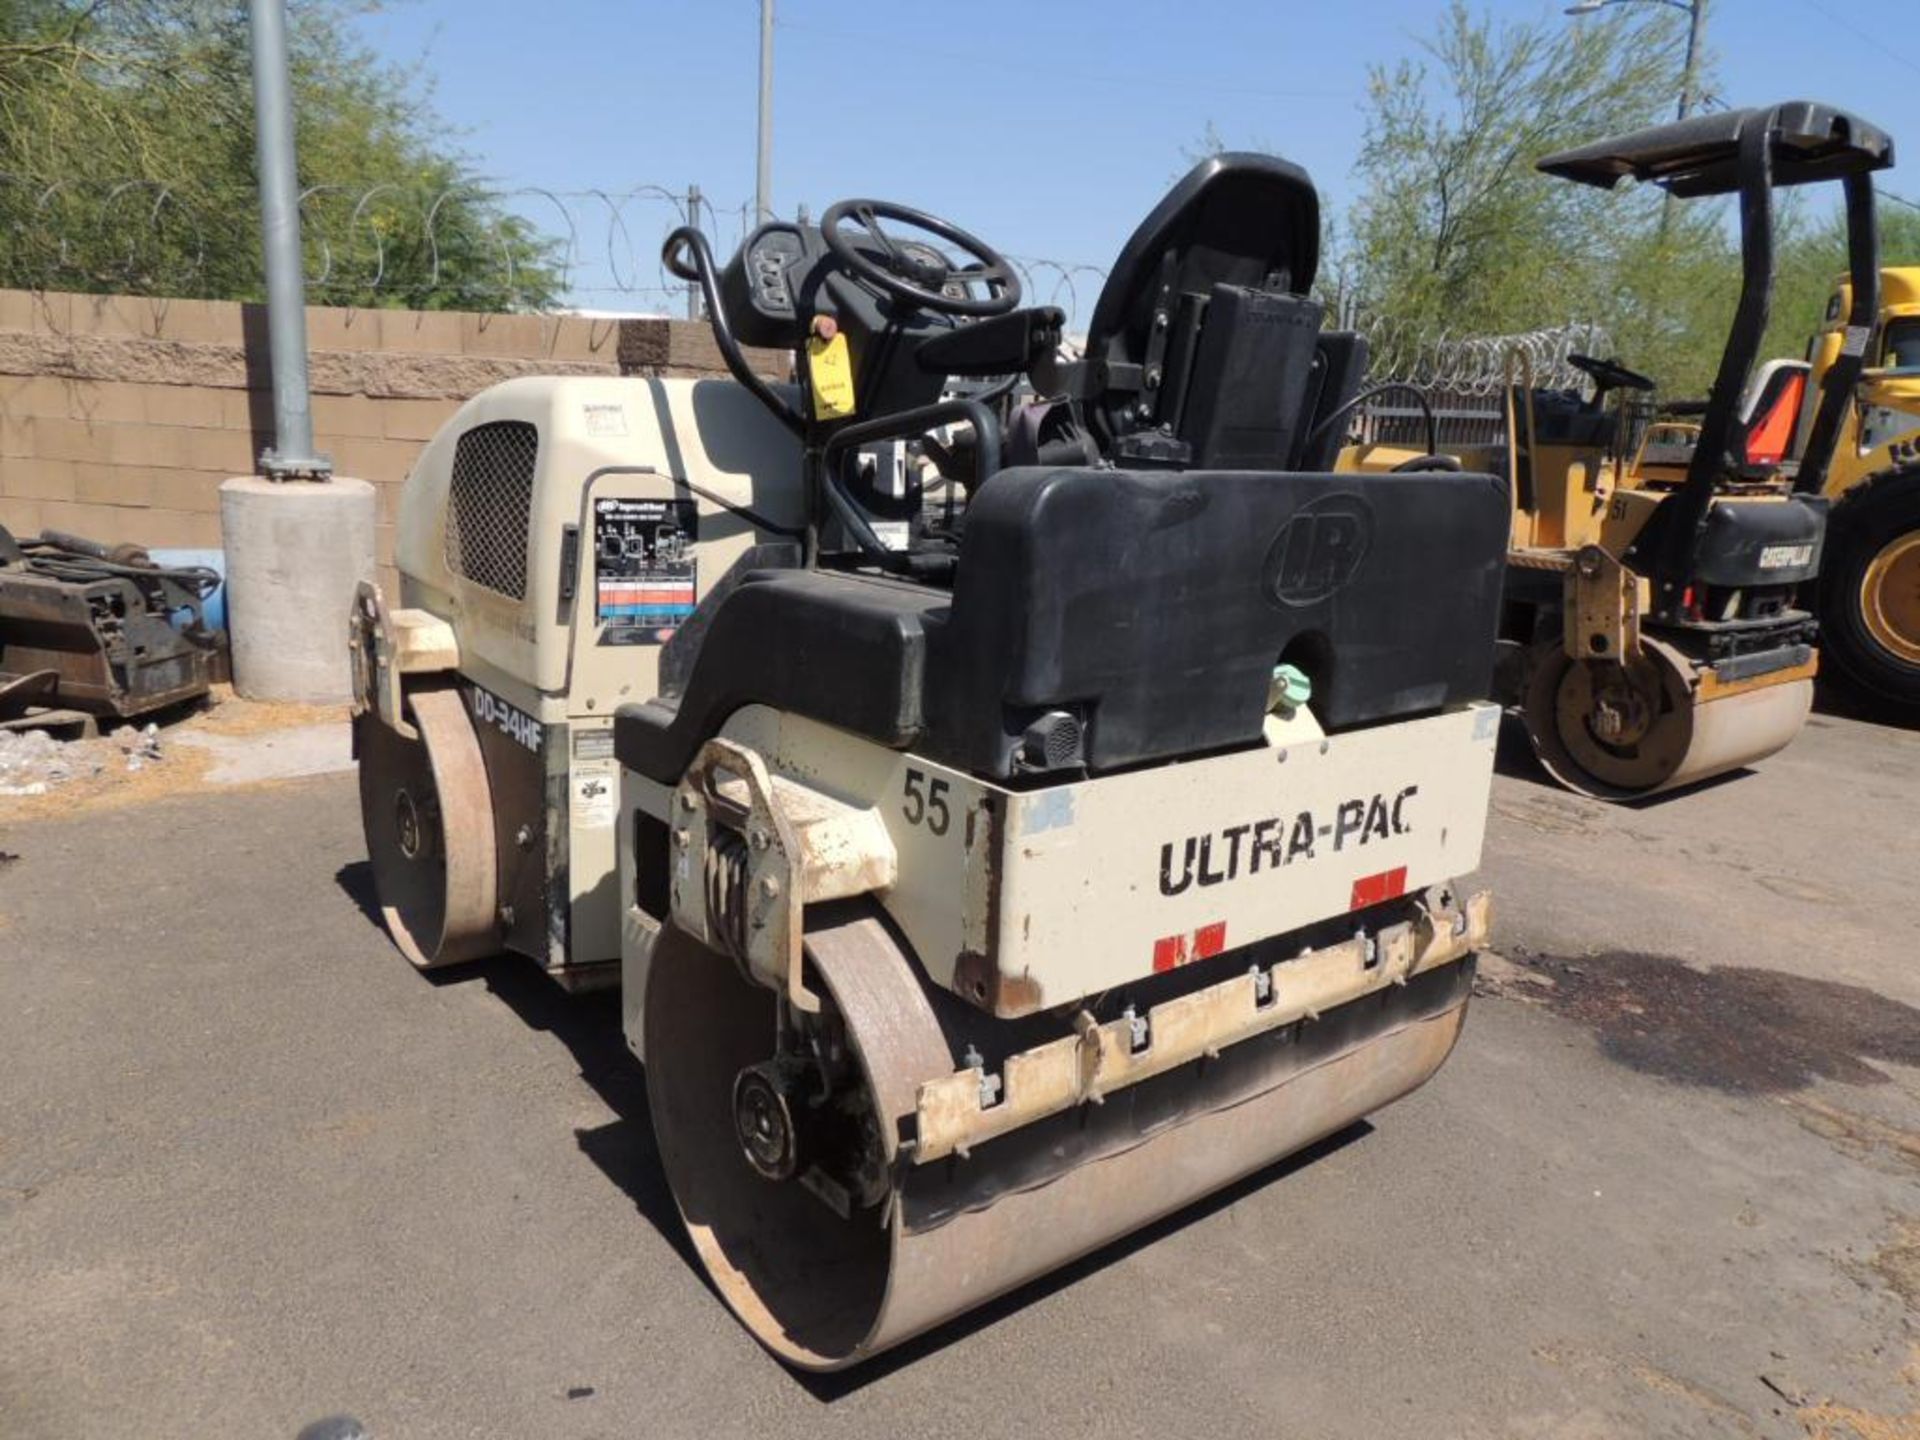 2006 Ingersoll Rand DD-34HF Roller, S/N 186680, 2139 Hrs. Indicated, (#55), LOCATION: 2435 S. 6th - Image 4 of 4